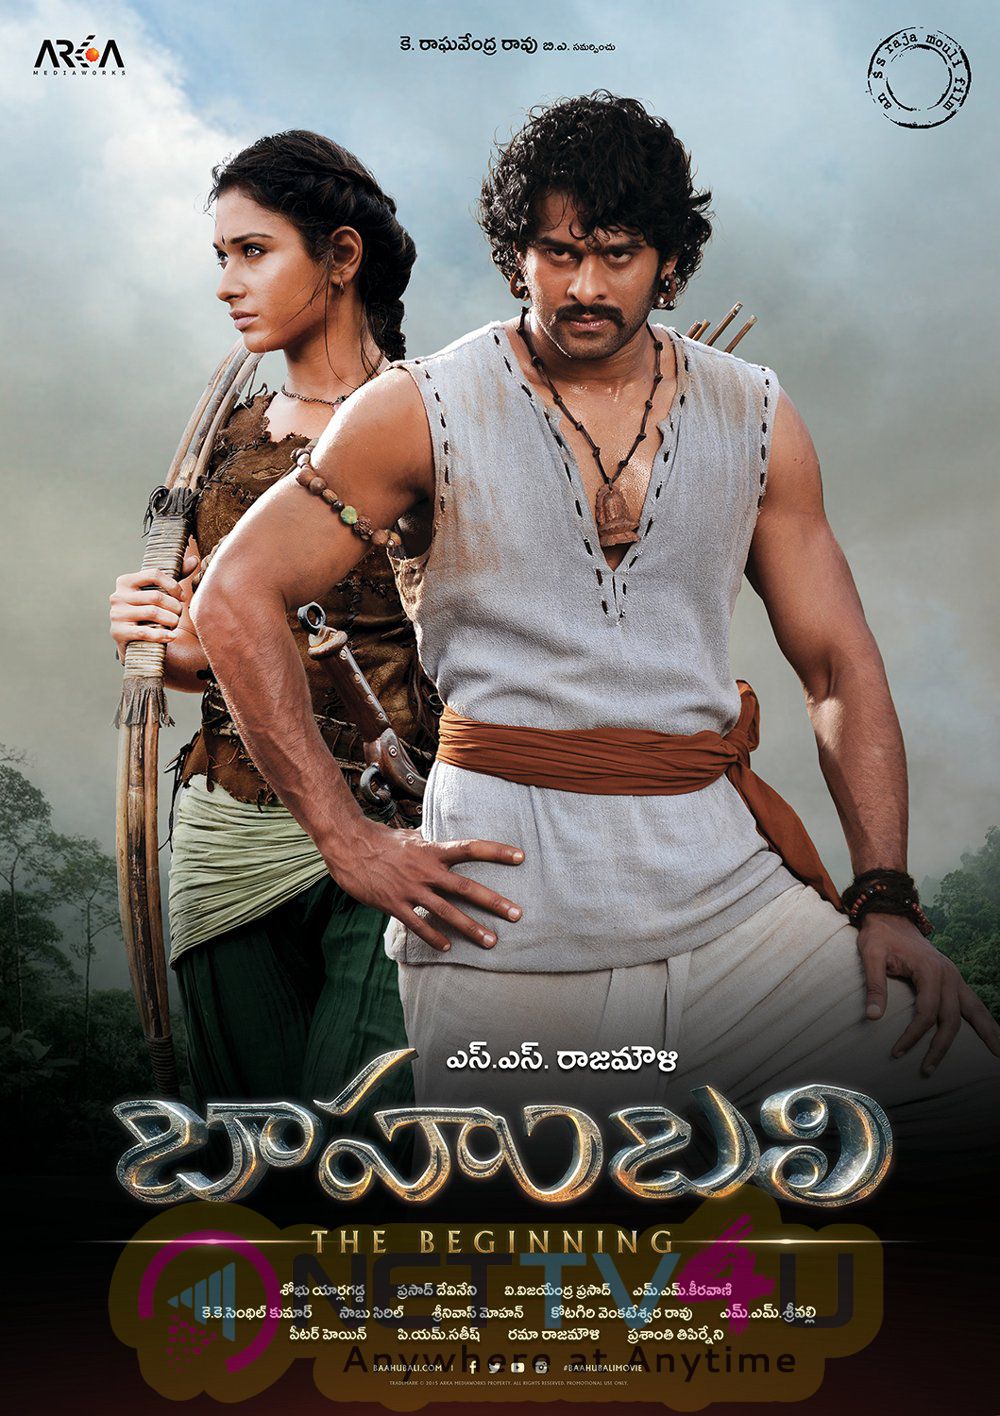 wallpapers and posters for baahubali telugu movie 30 days 13